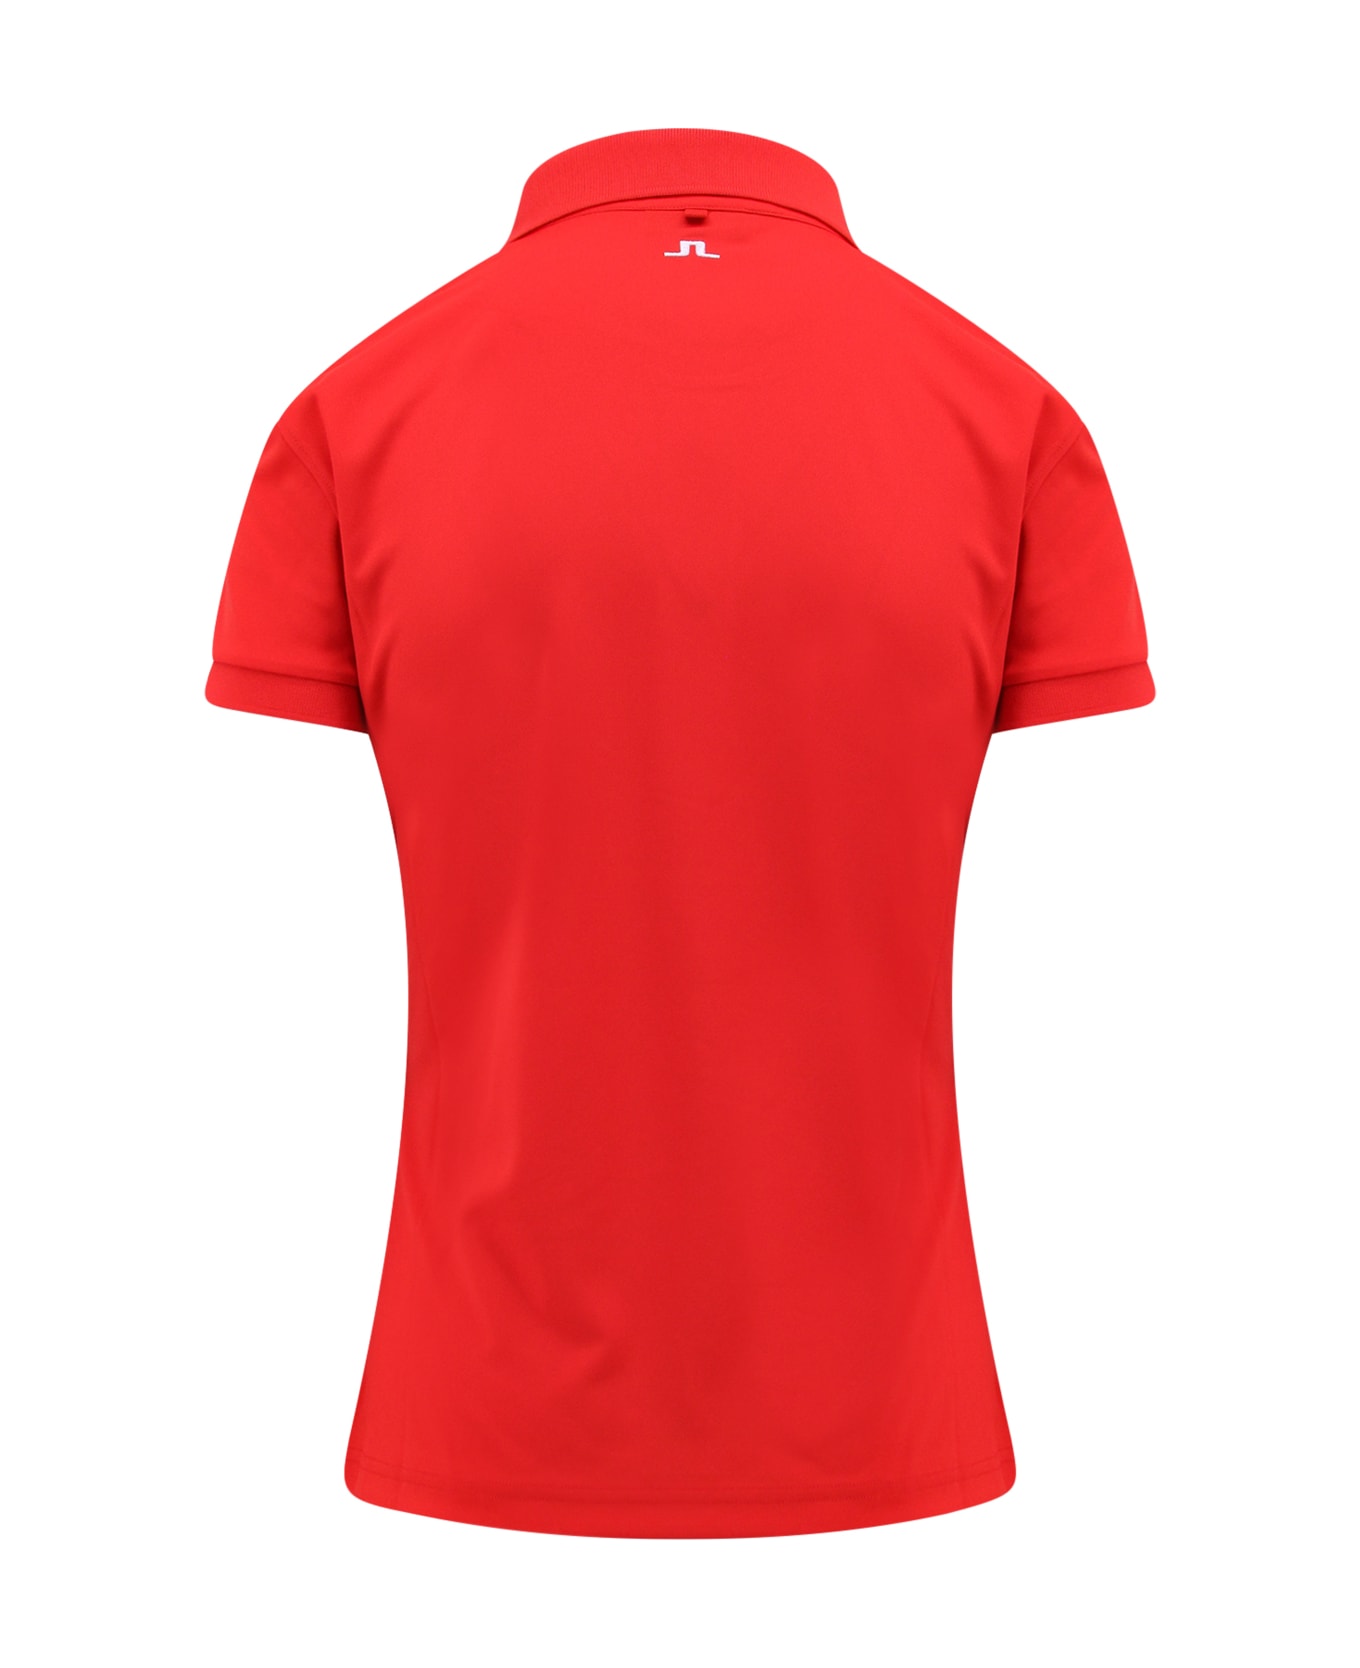 J.Lindeberg Tour Polo Shirt - Red ポロシャツ